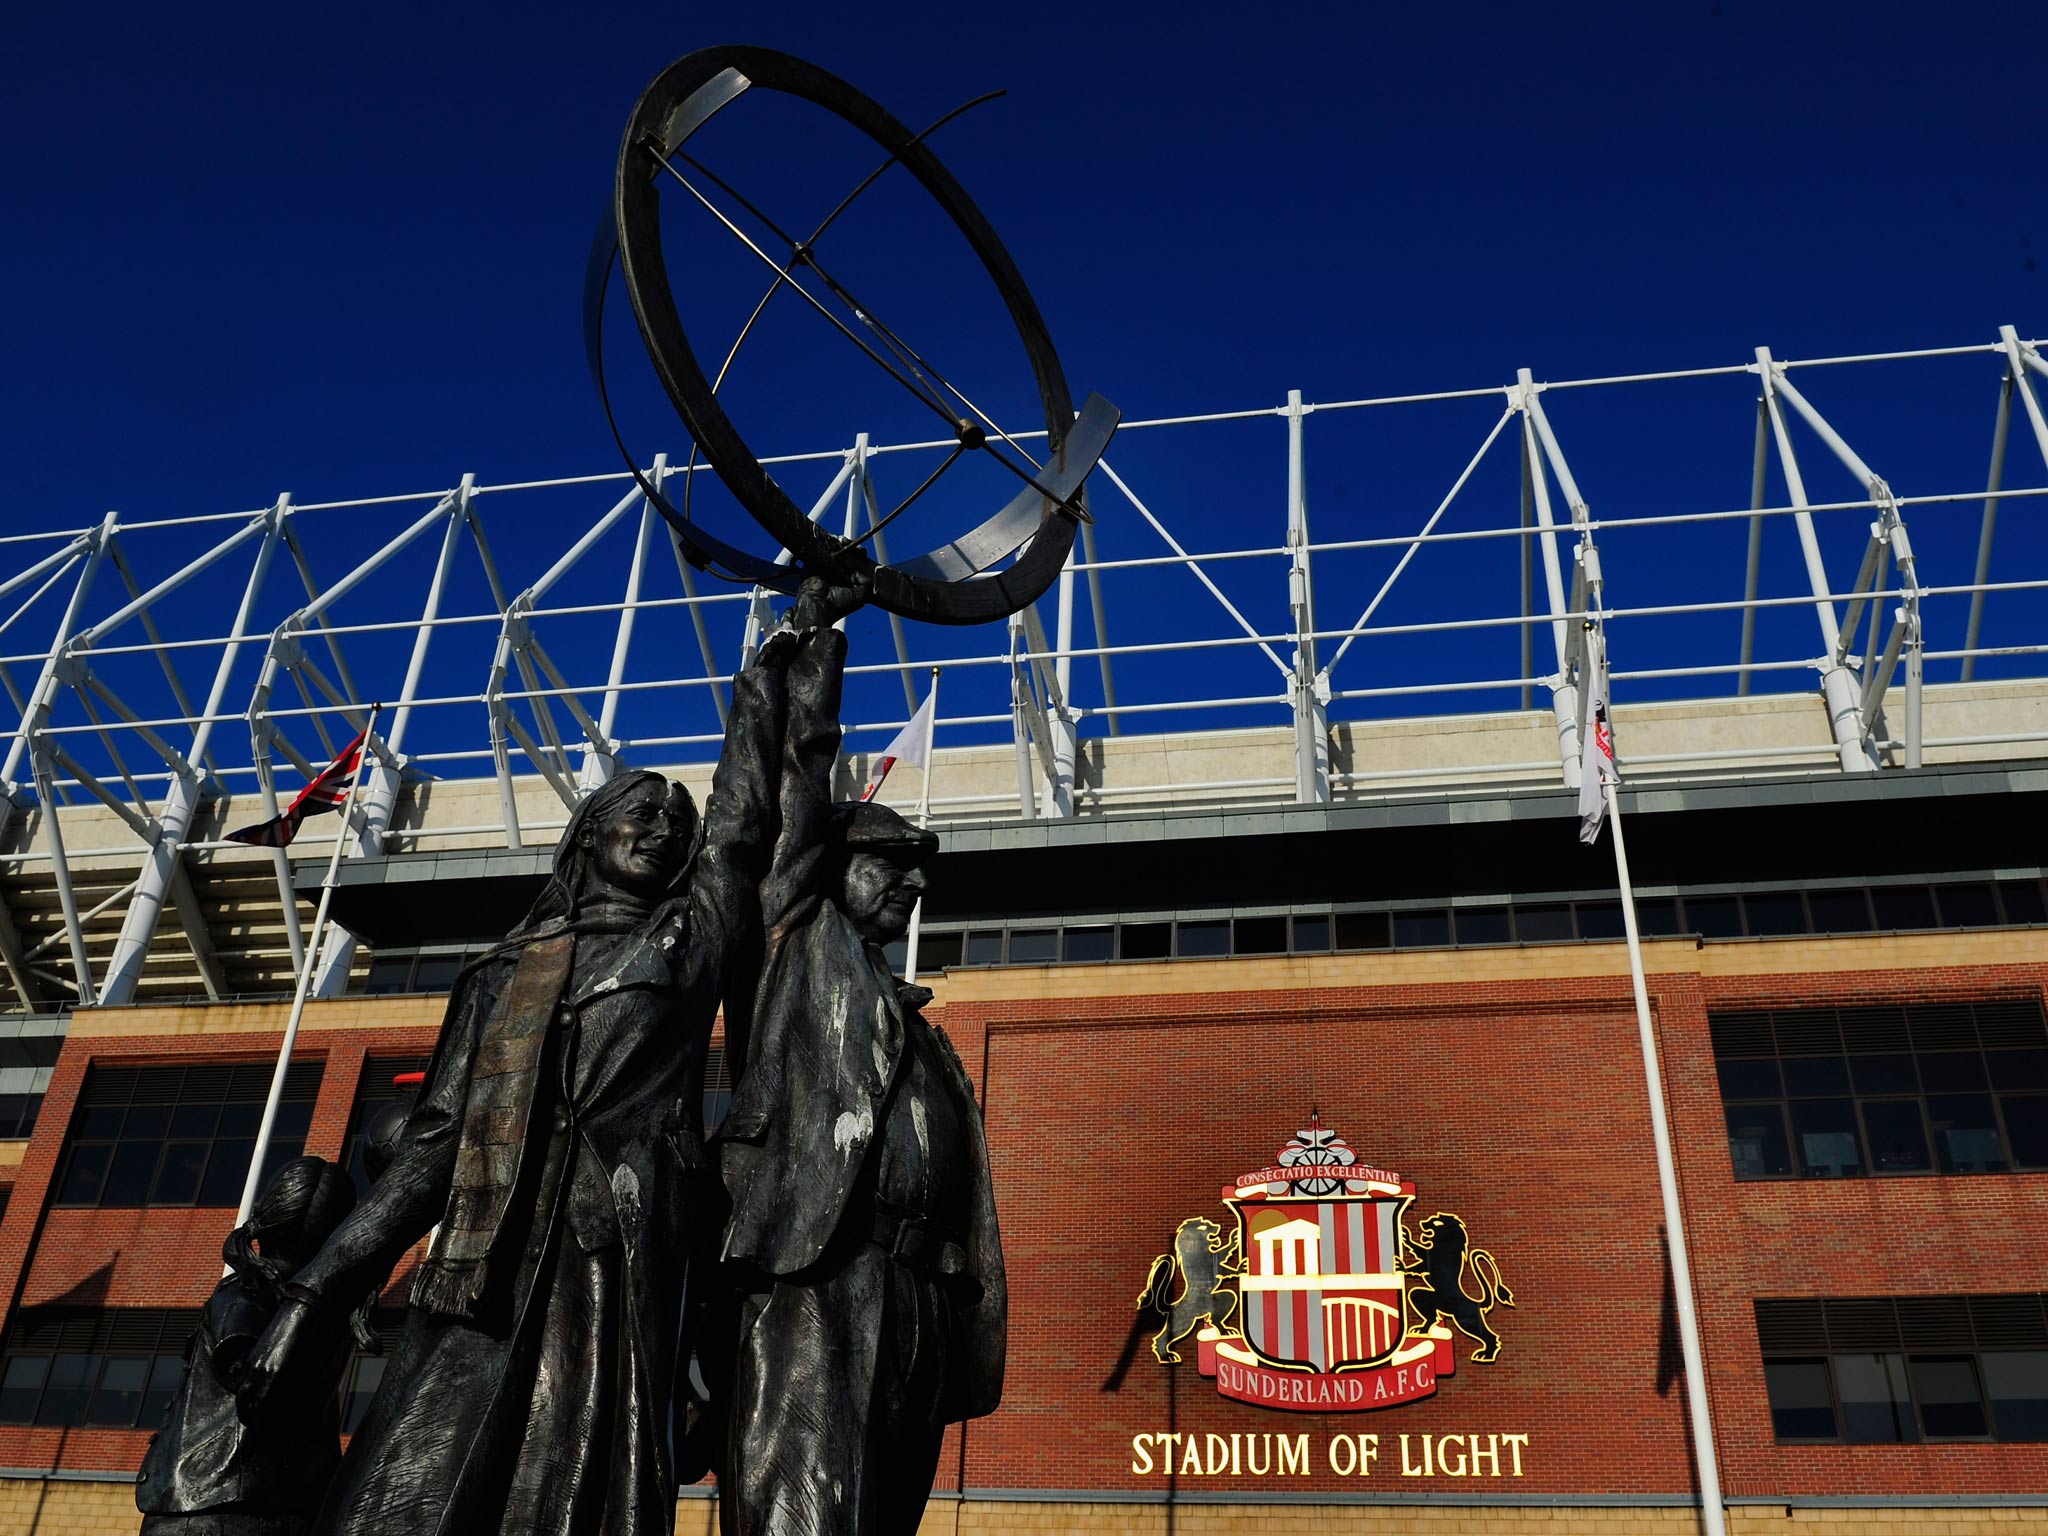 A view of the Stadium of Light